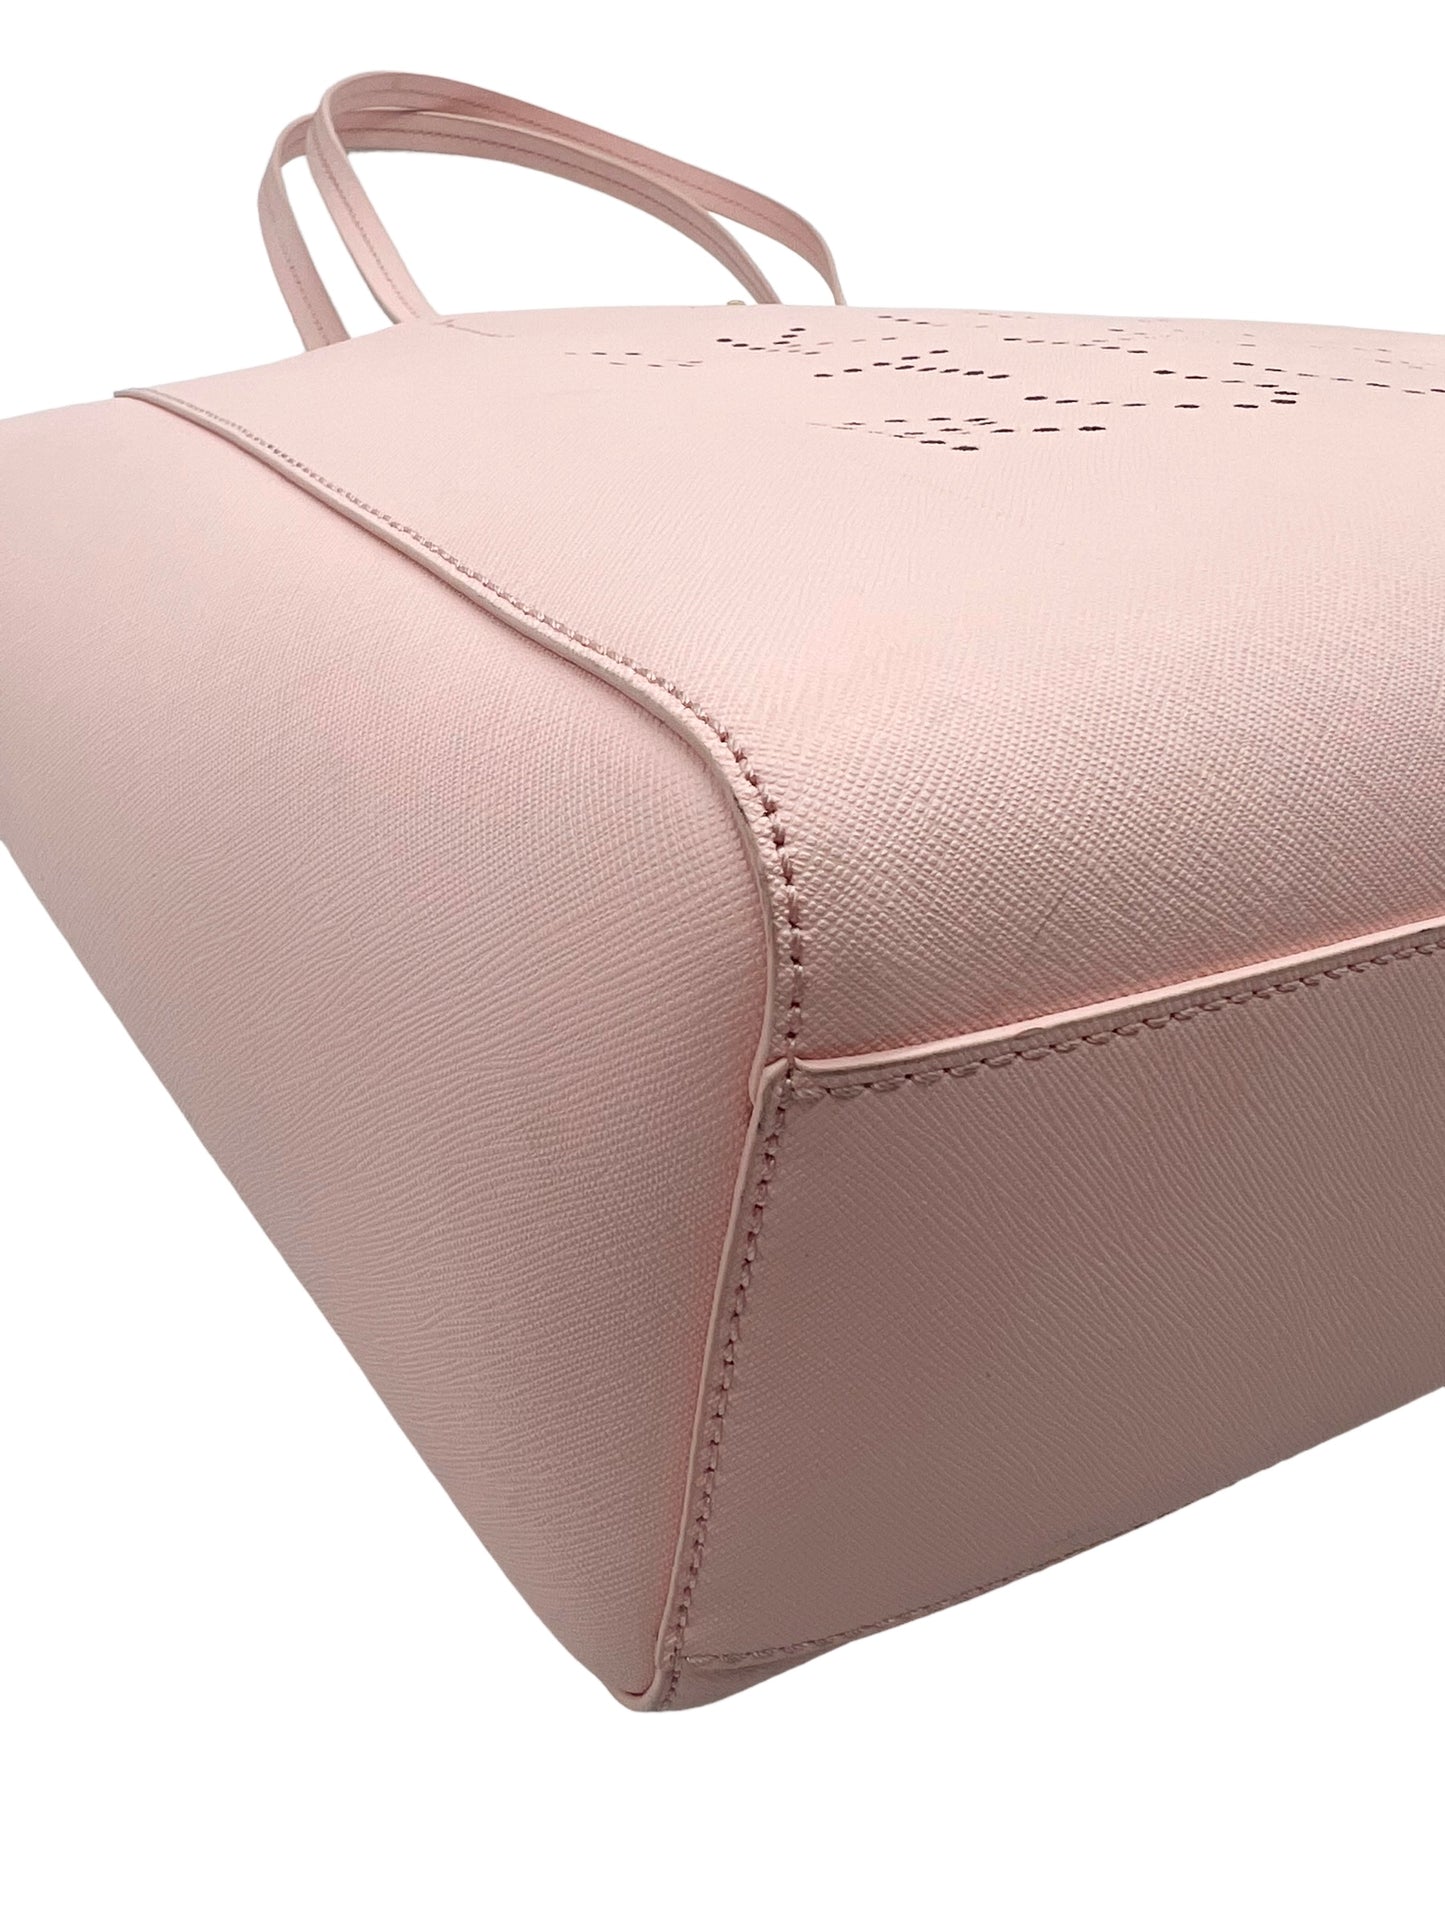 Kate Spade Pink Hallie 'Skirt The Rules' Perforated Tote